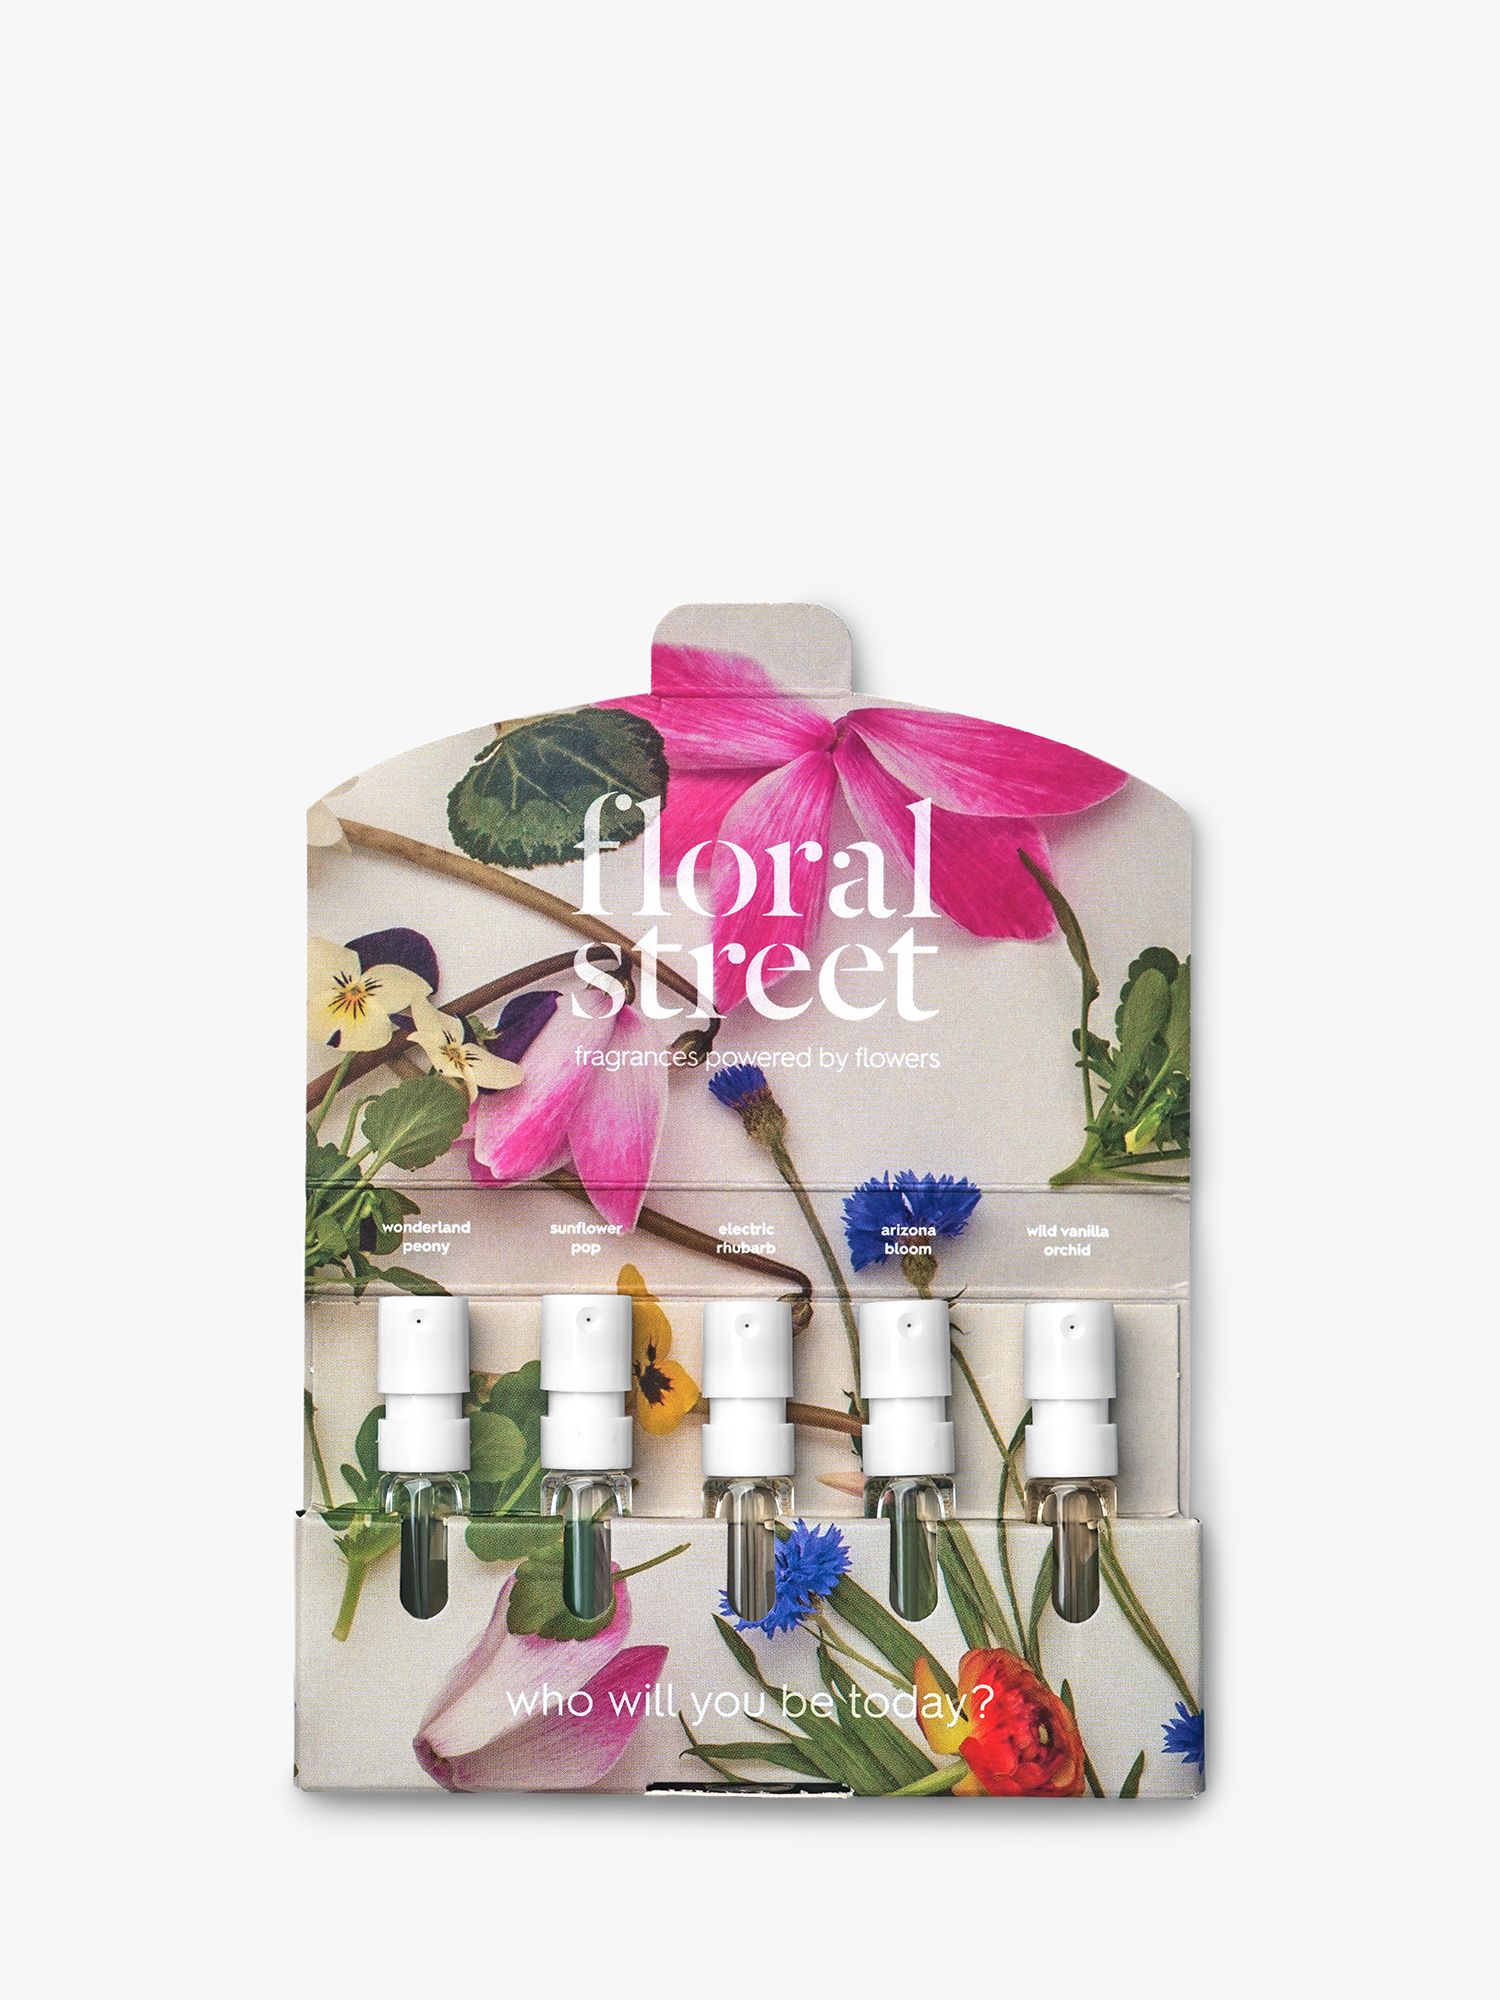 Discover set. Floral Street - Mini Light Discovery Set.